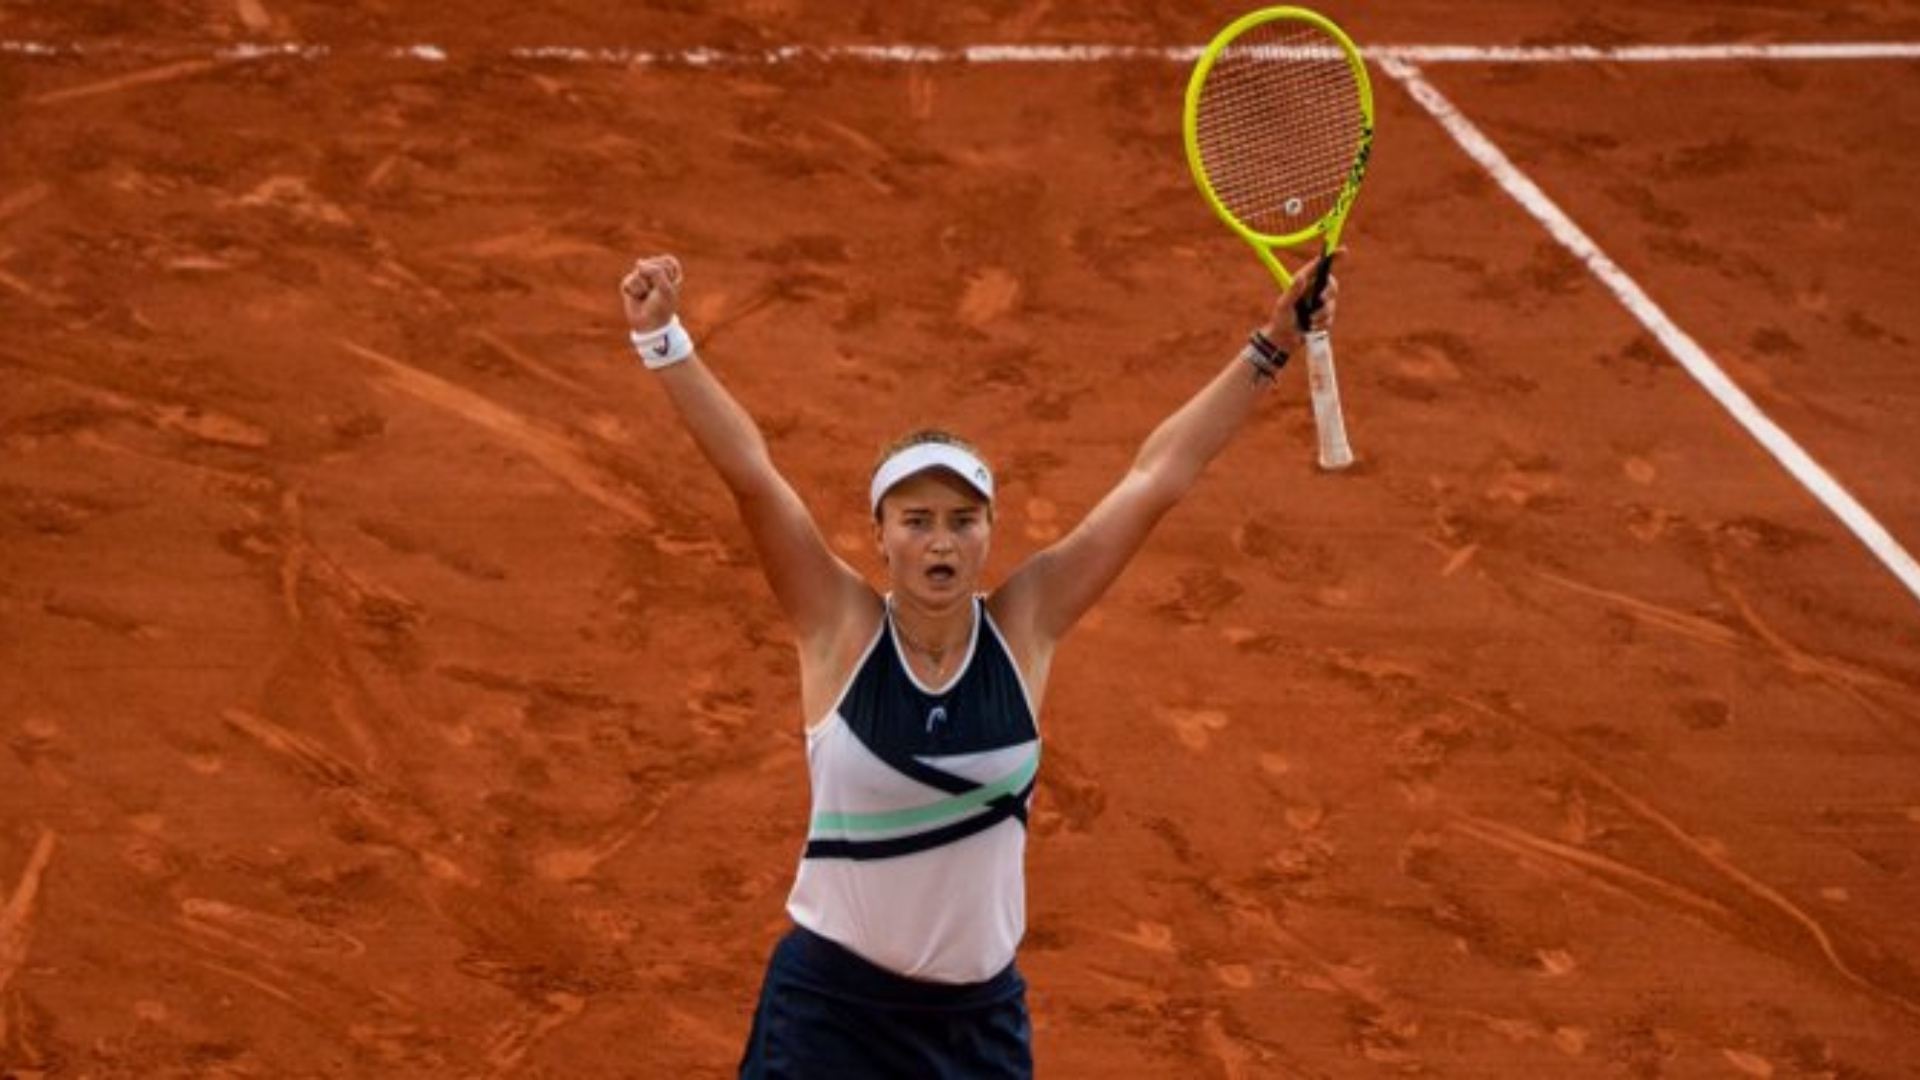 Barbora Krejcikova was mentored by Jana Novotna and she dedicated the French Open title to her.